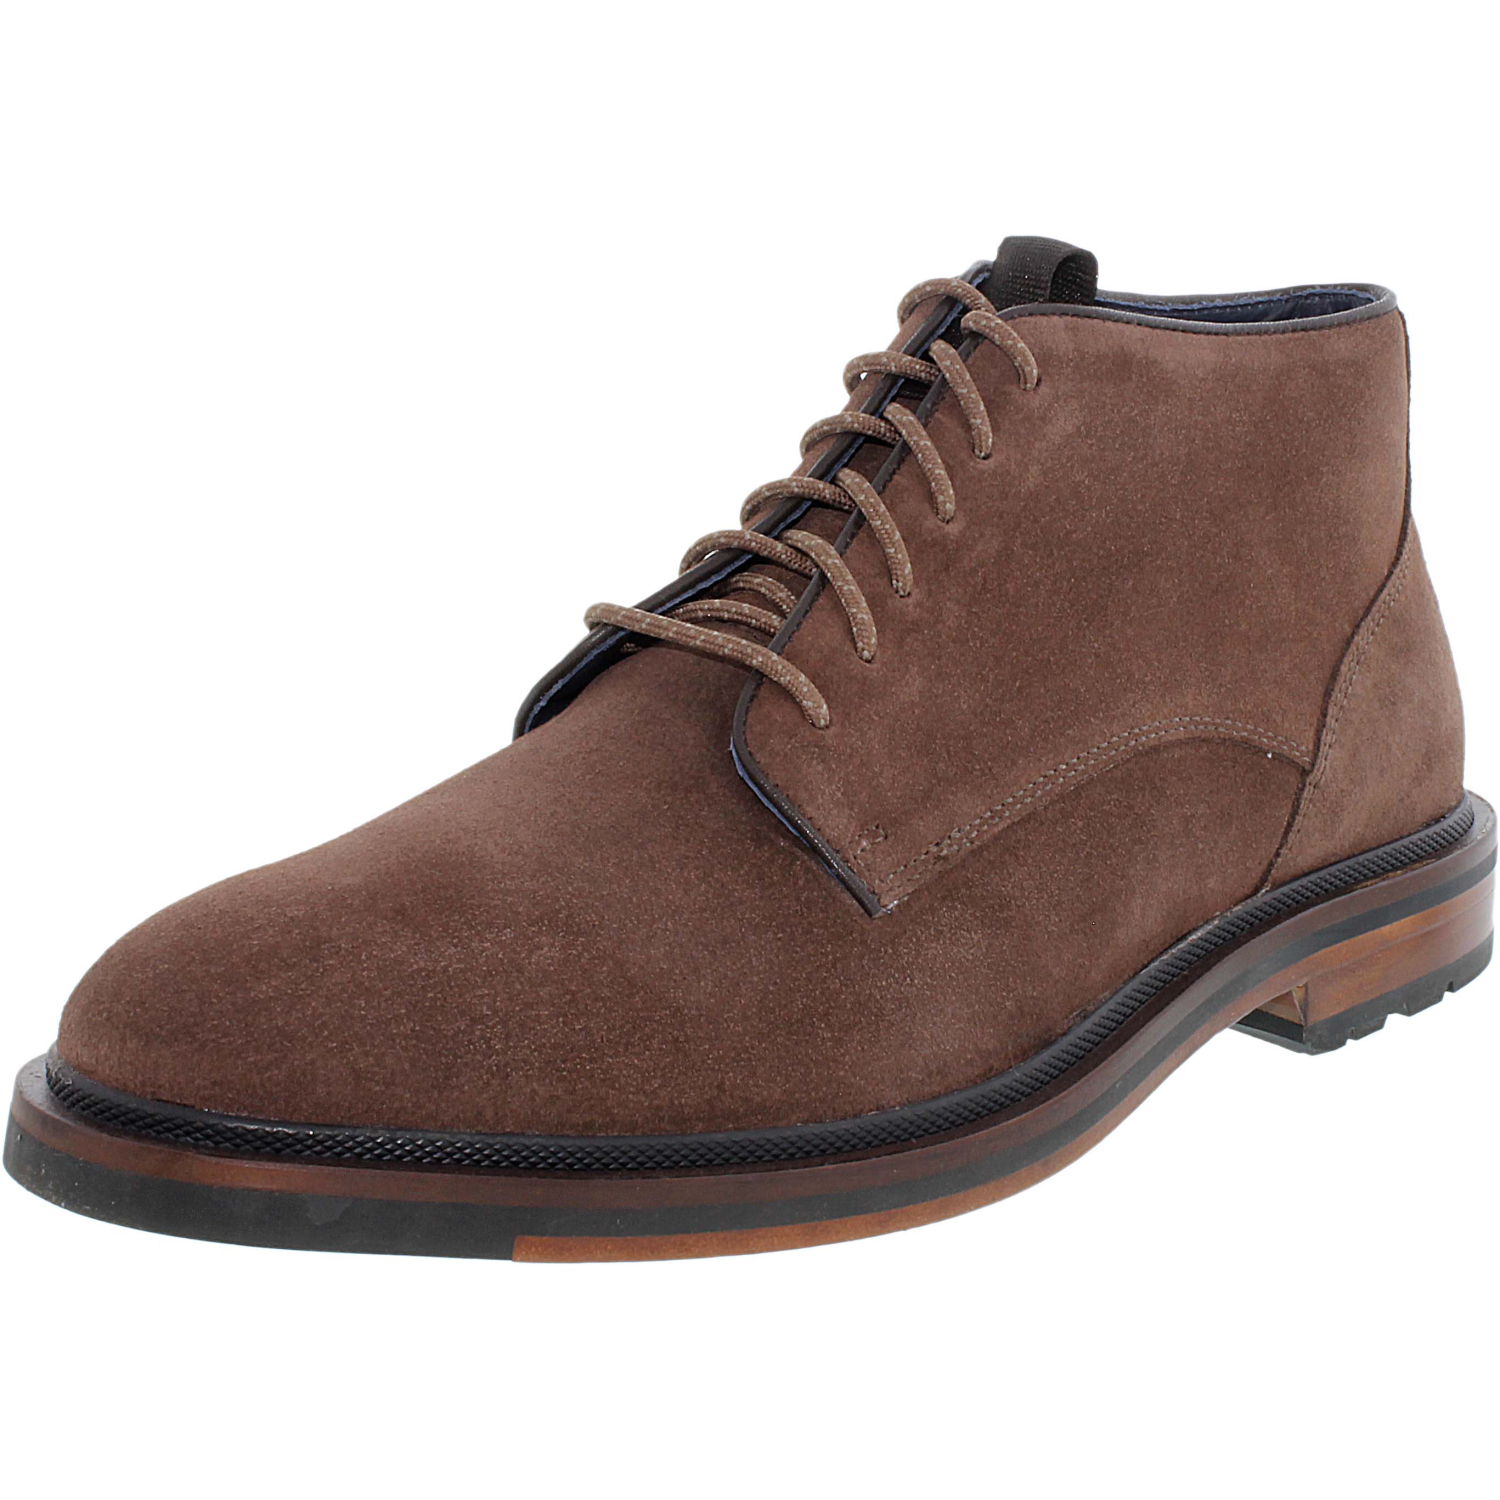 Cole Haan Men's Cranston Chukka Ankle-High Suede Boot